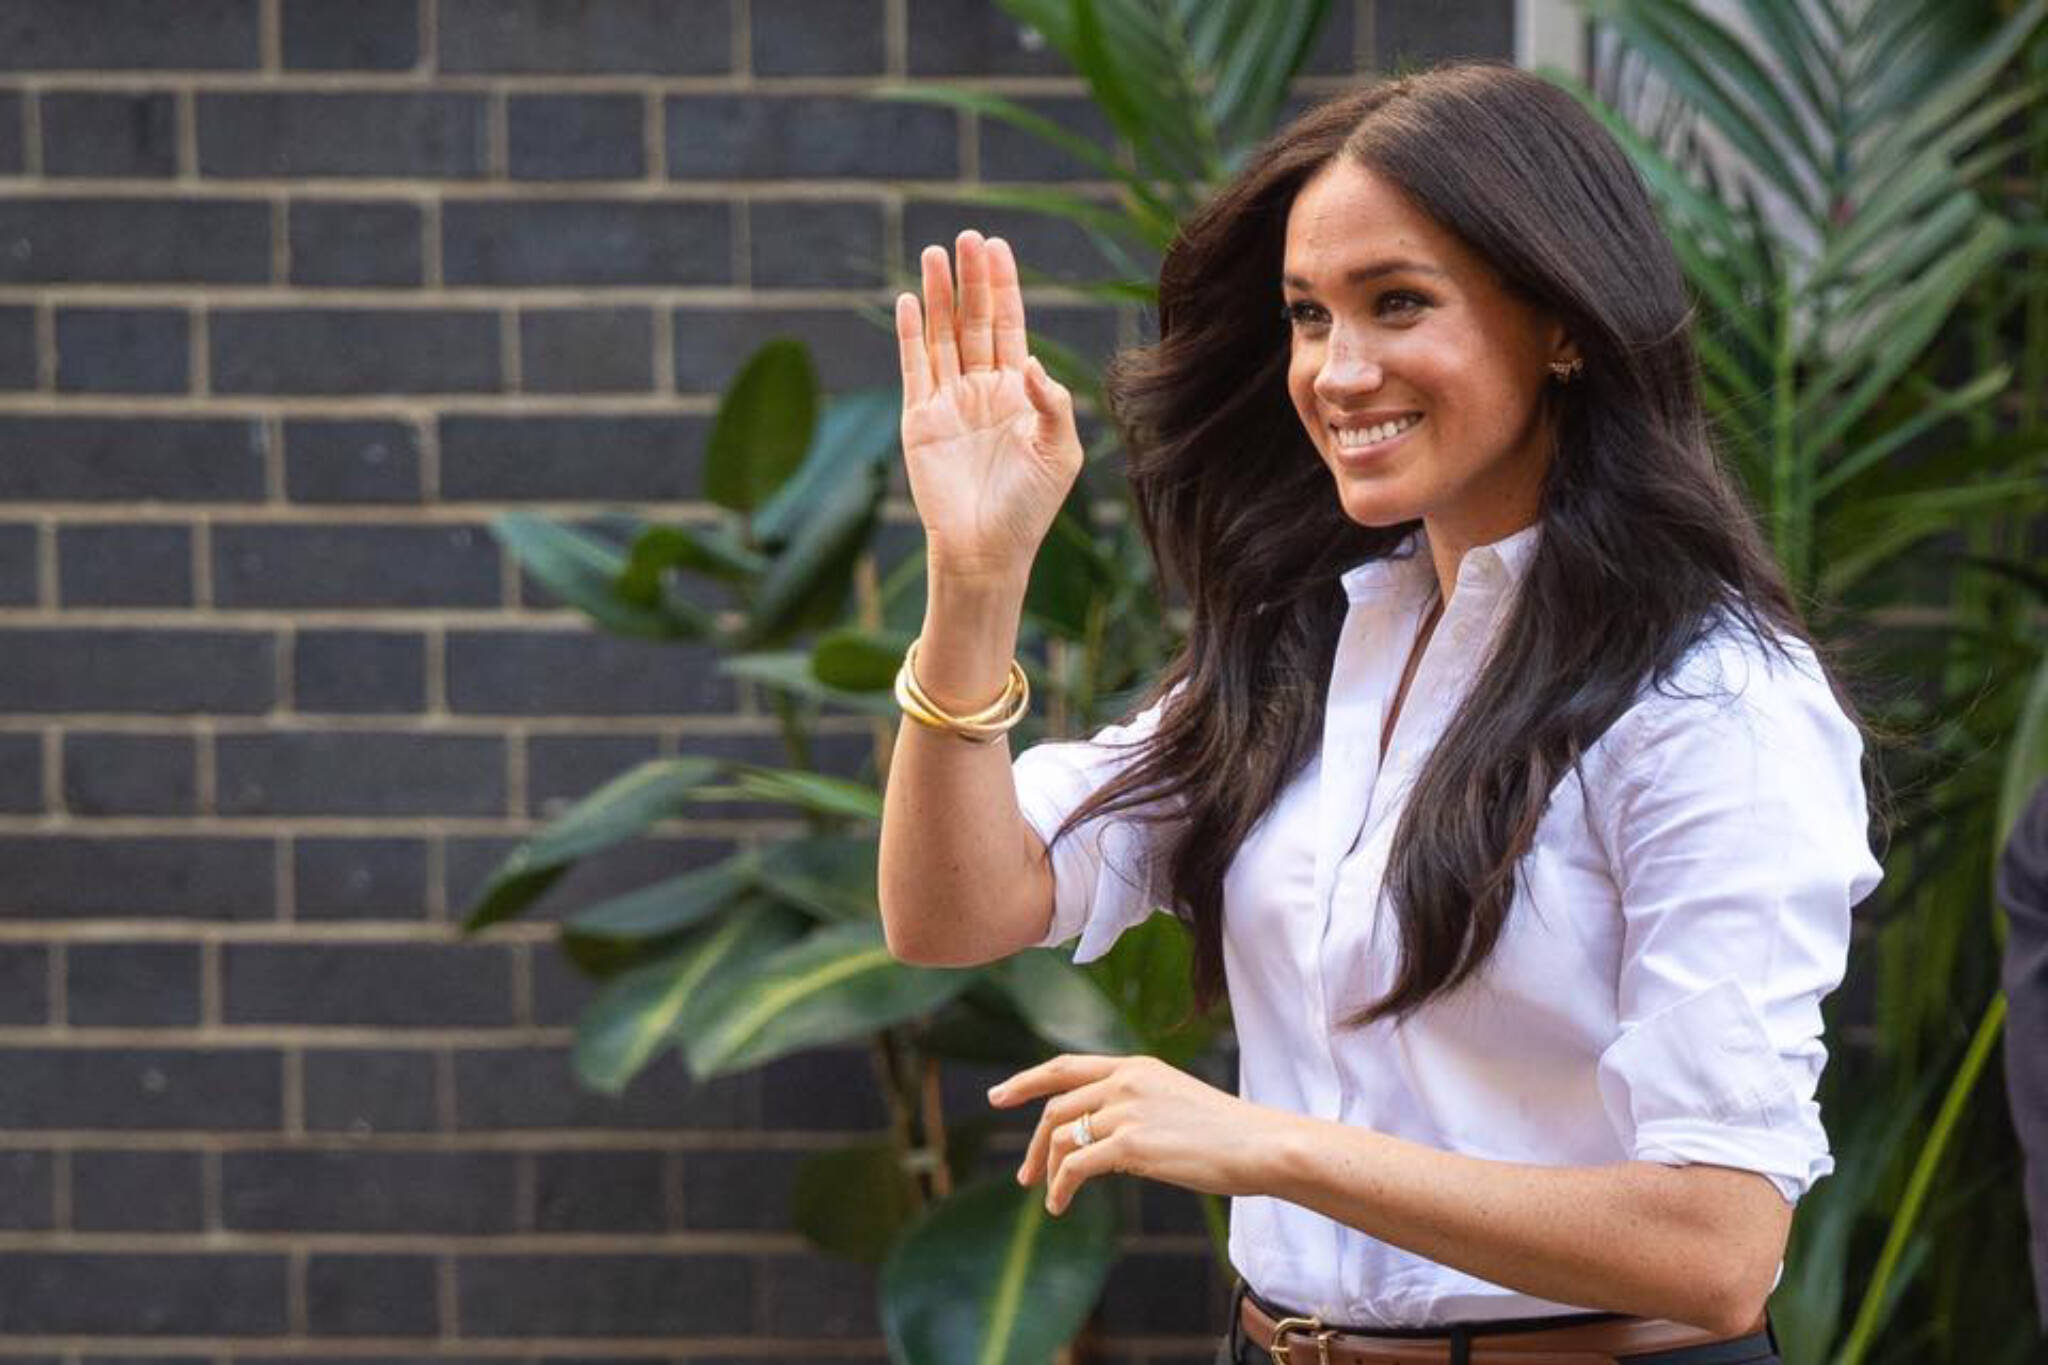 You Can Buy Furniture That Meghan Markle Might Have Sat On In